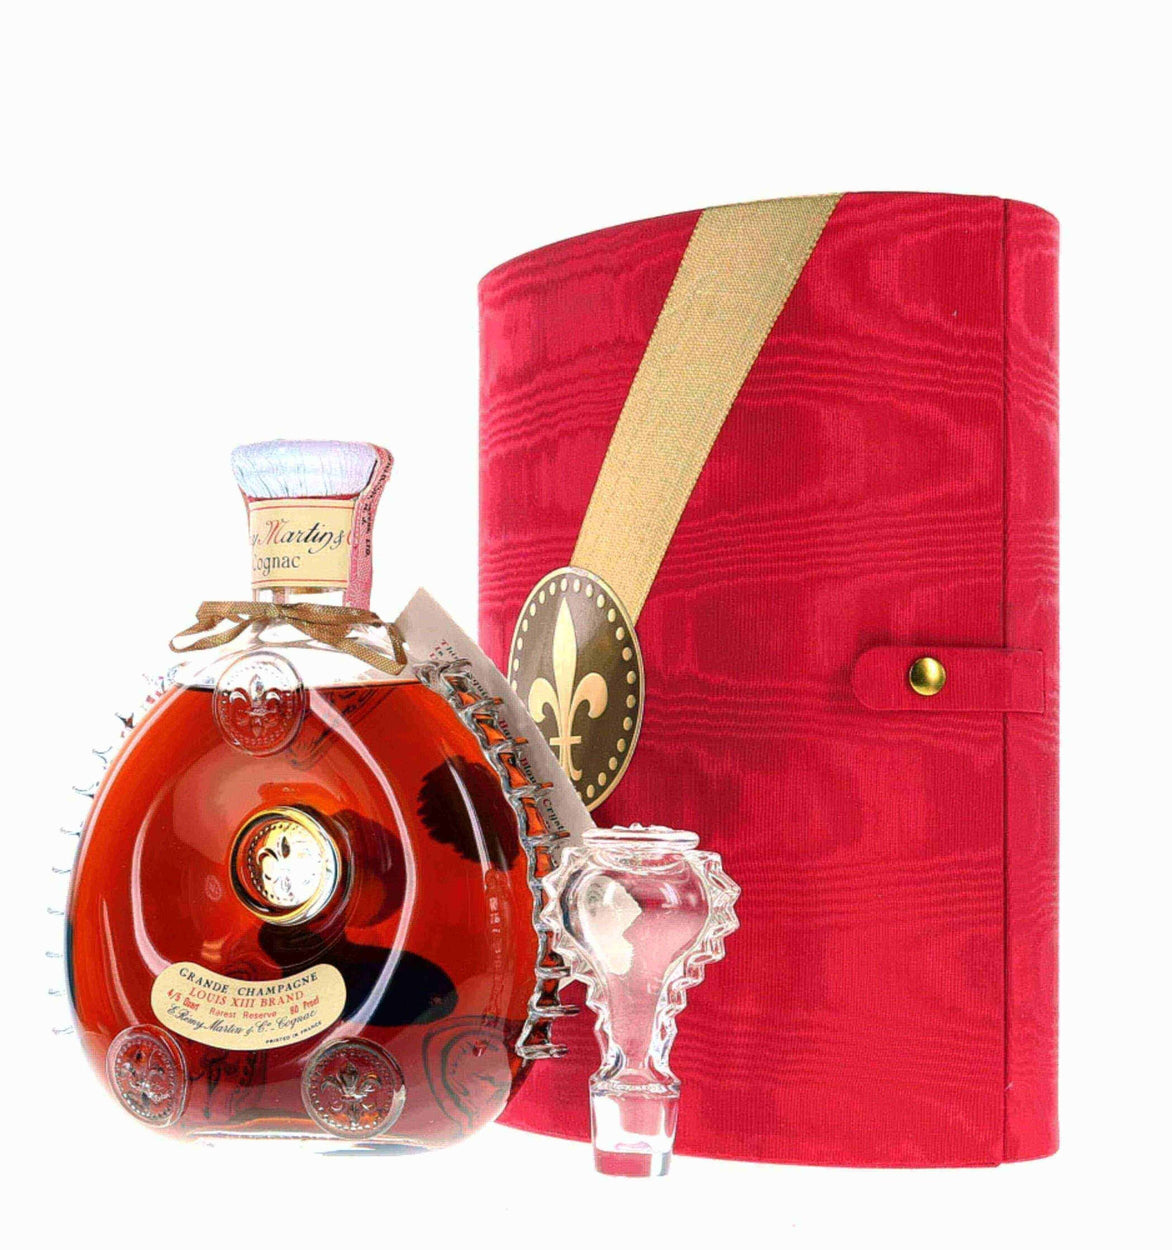 Louis XIII cognac launches The Time Collection limited editions